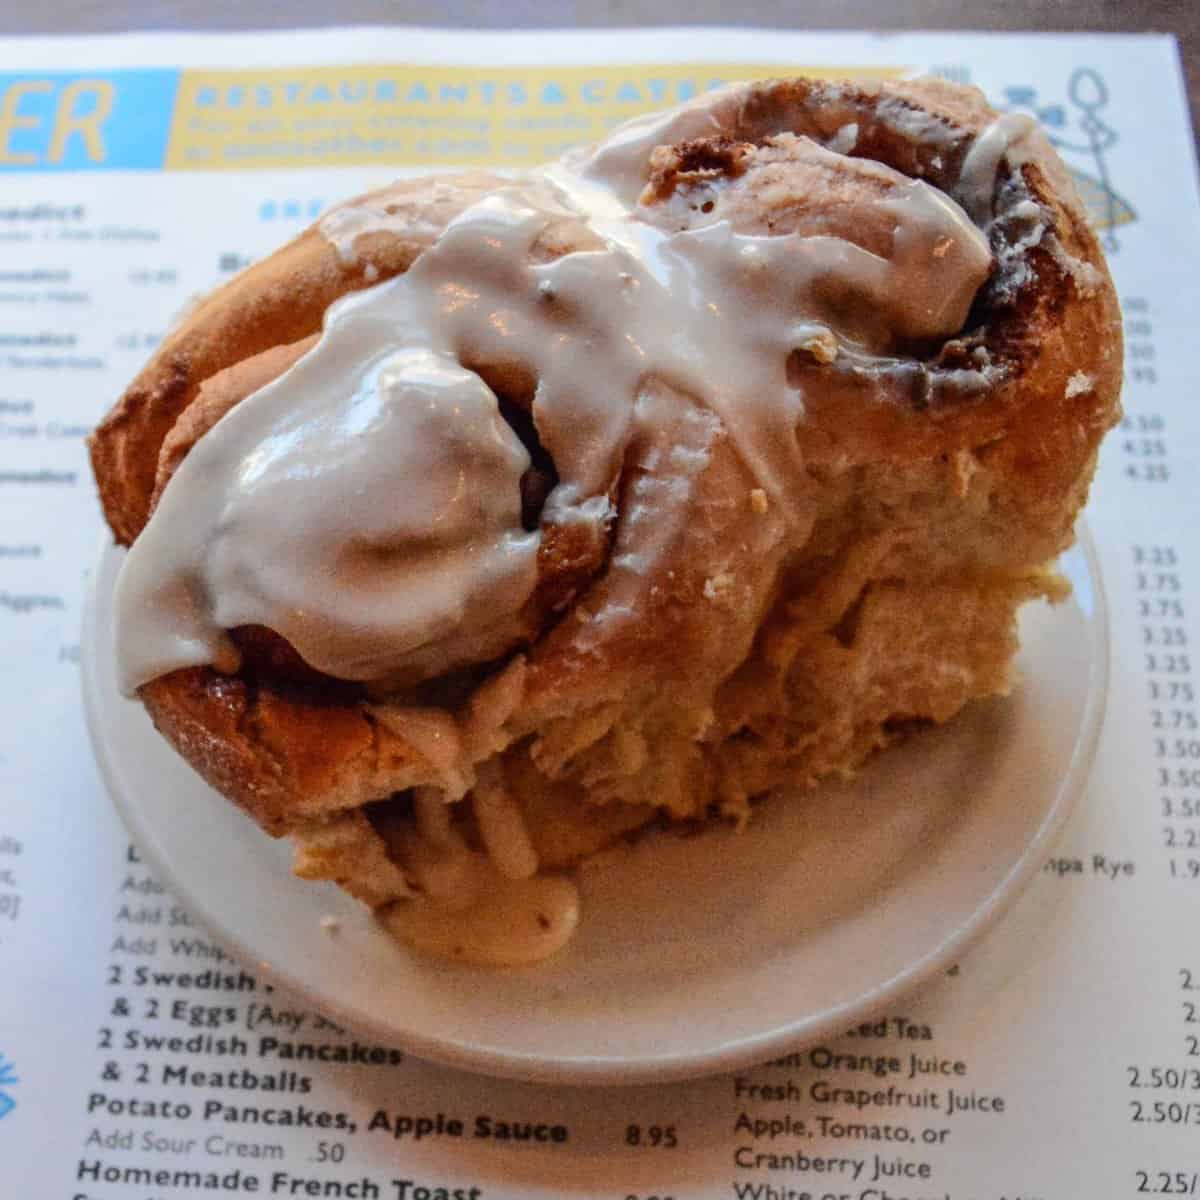  A warm cinnamon roll on a cold morning is pure bliss.